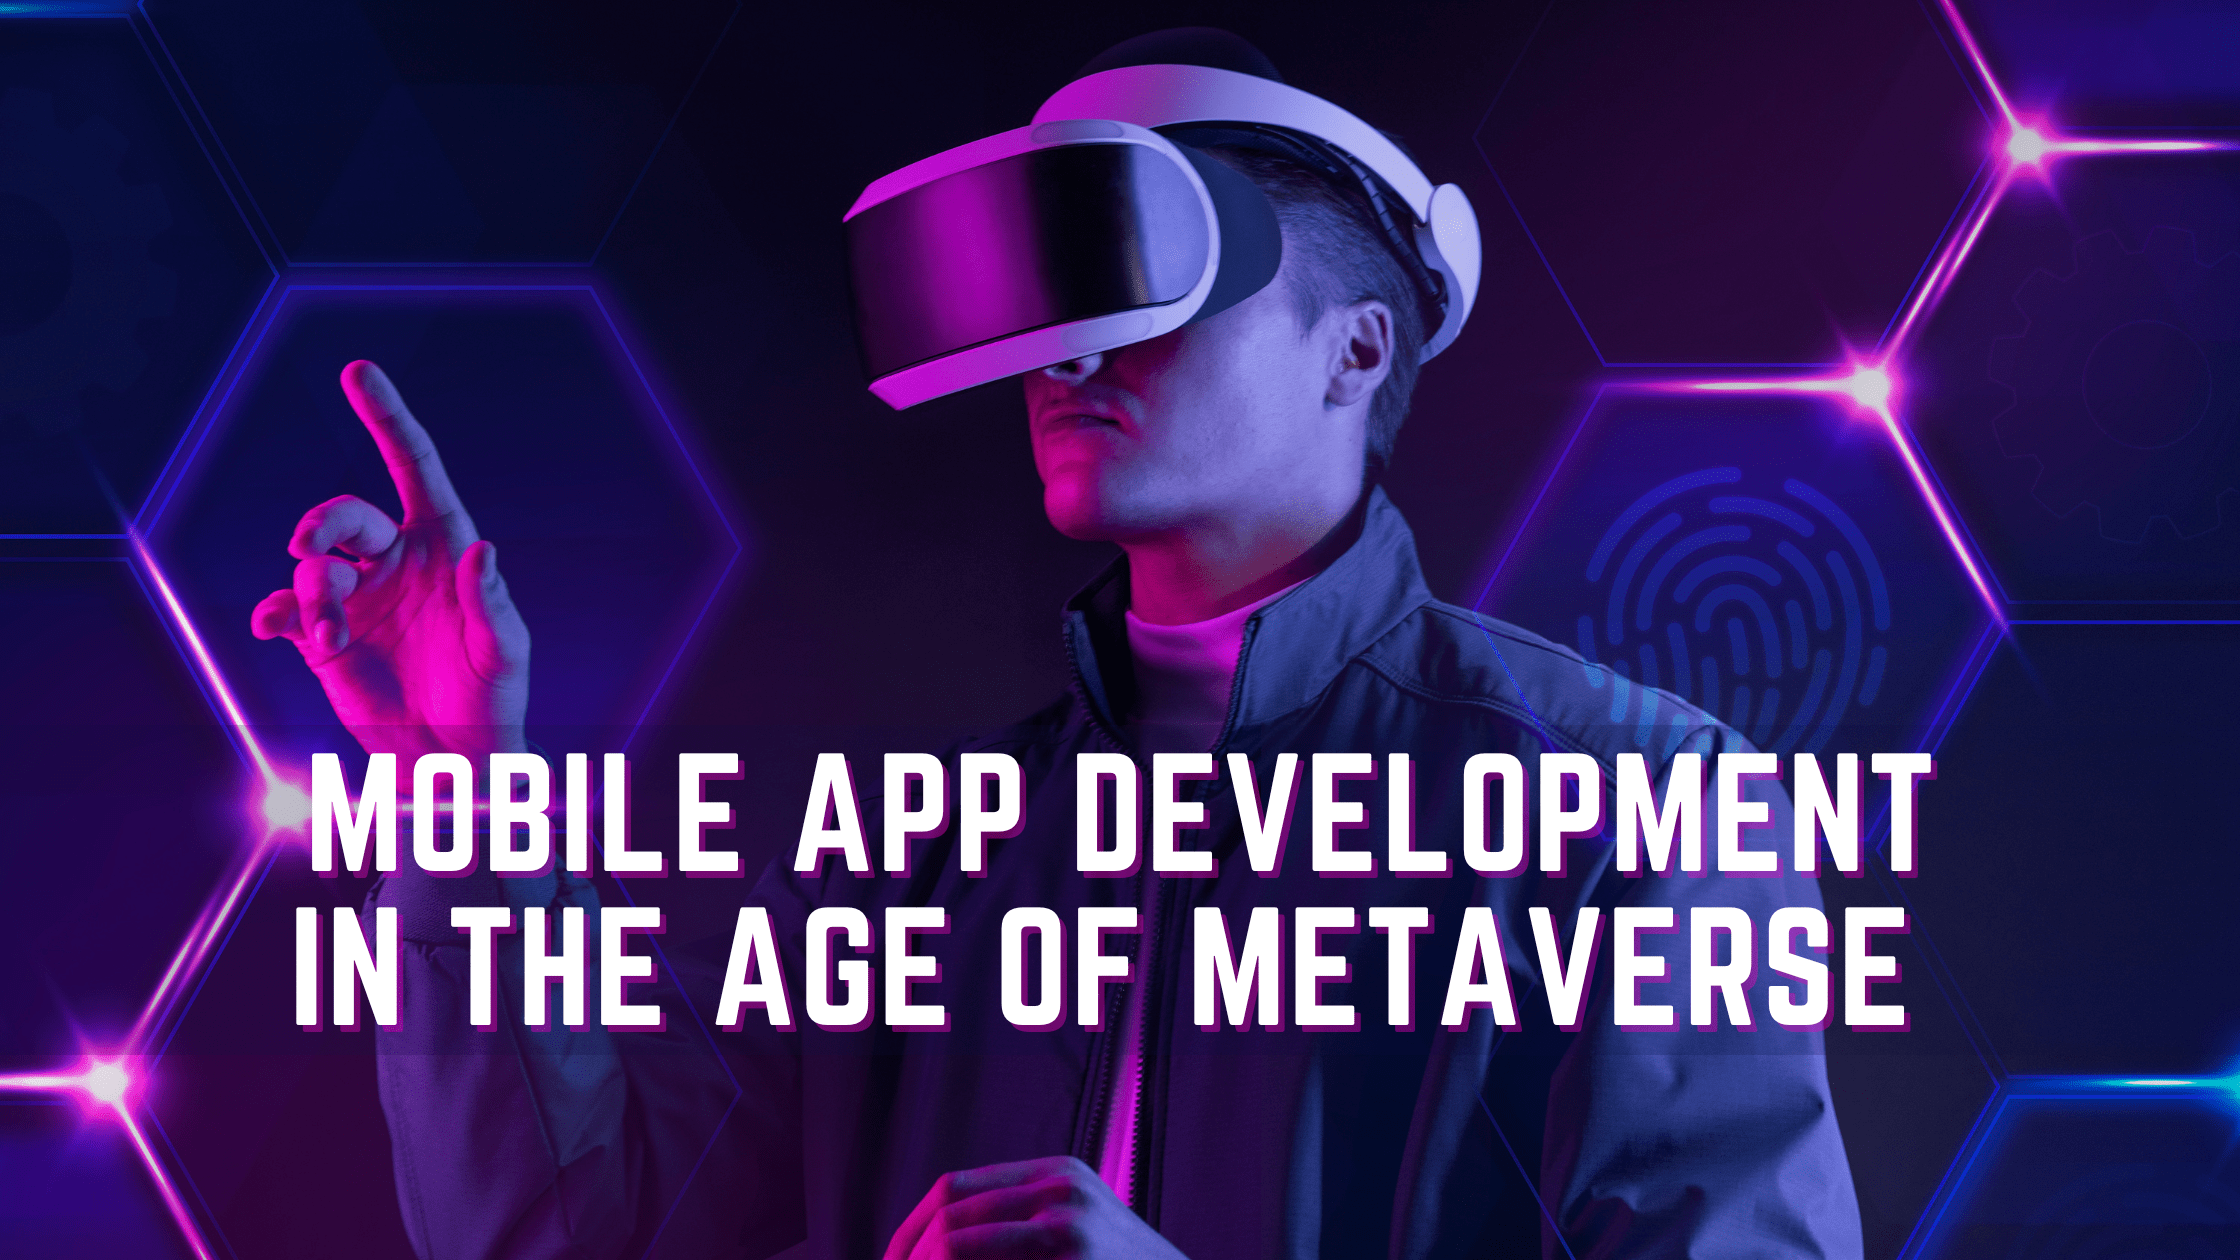 Impact Of Metaverse Technology: A Guide - eLearning Industry